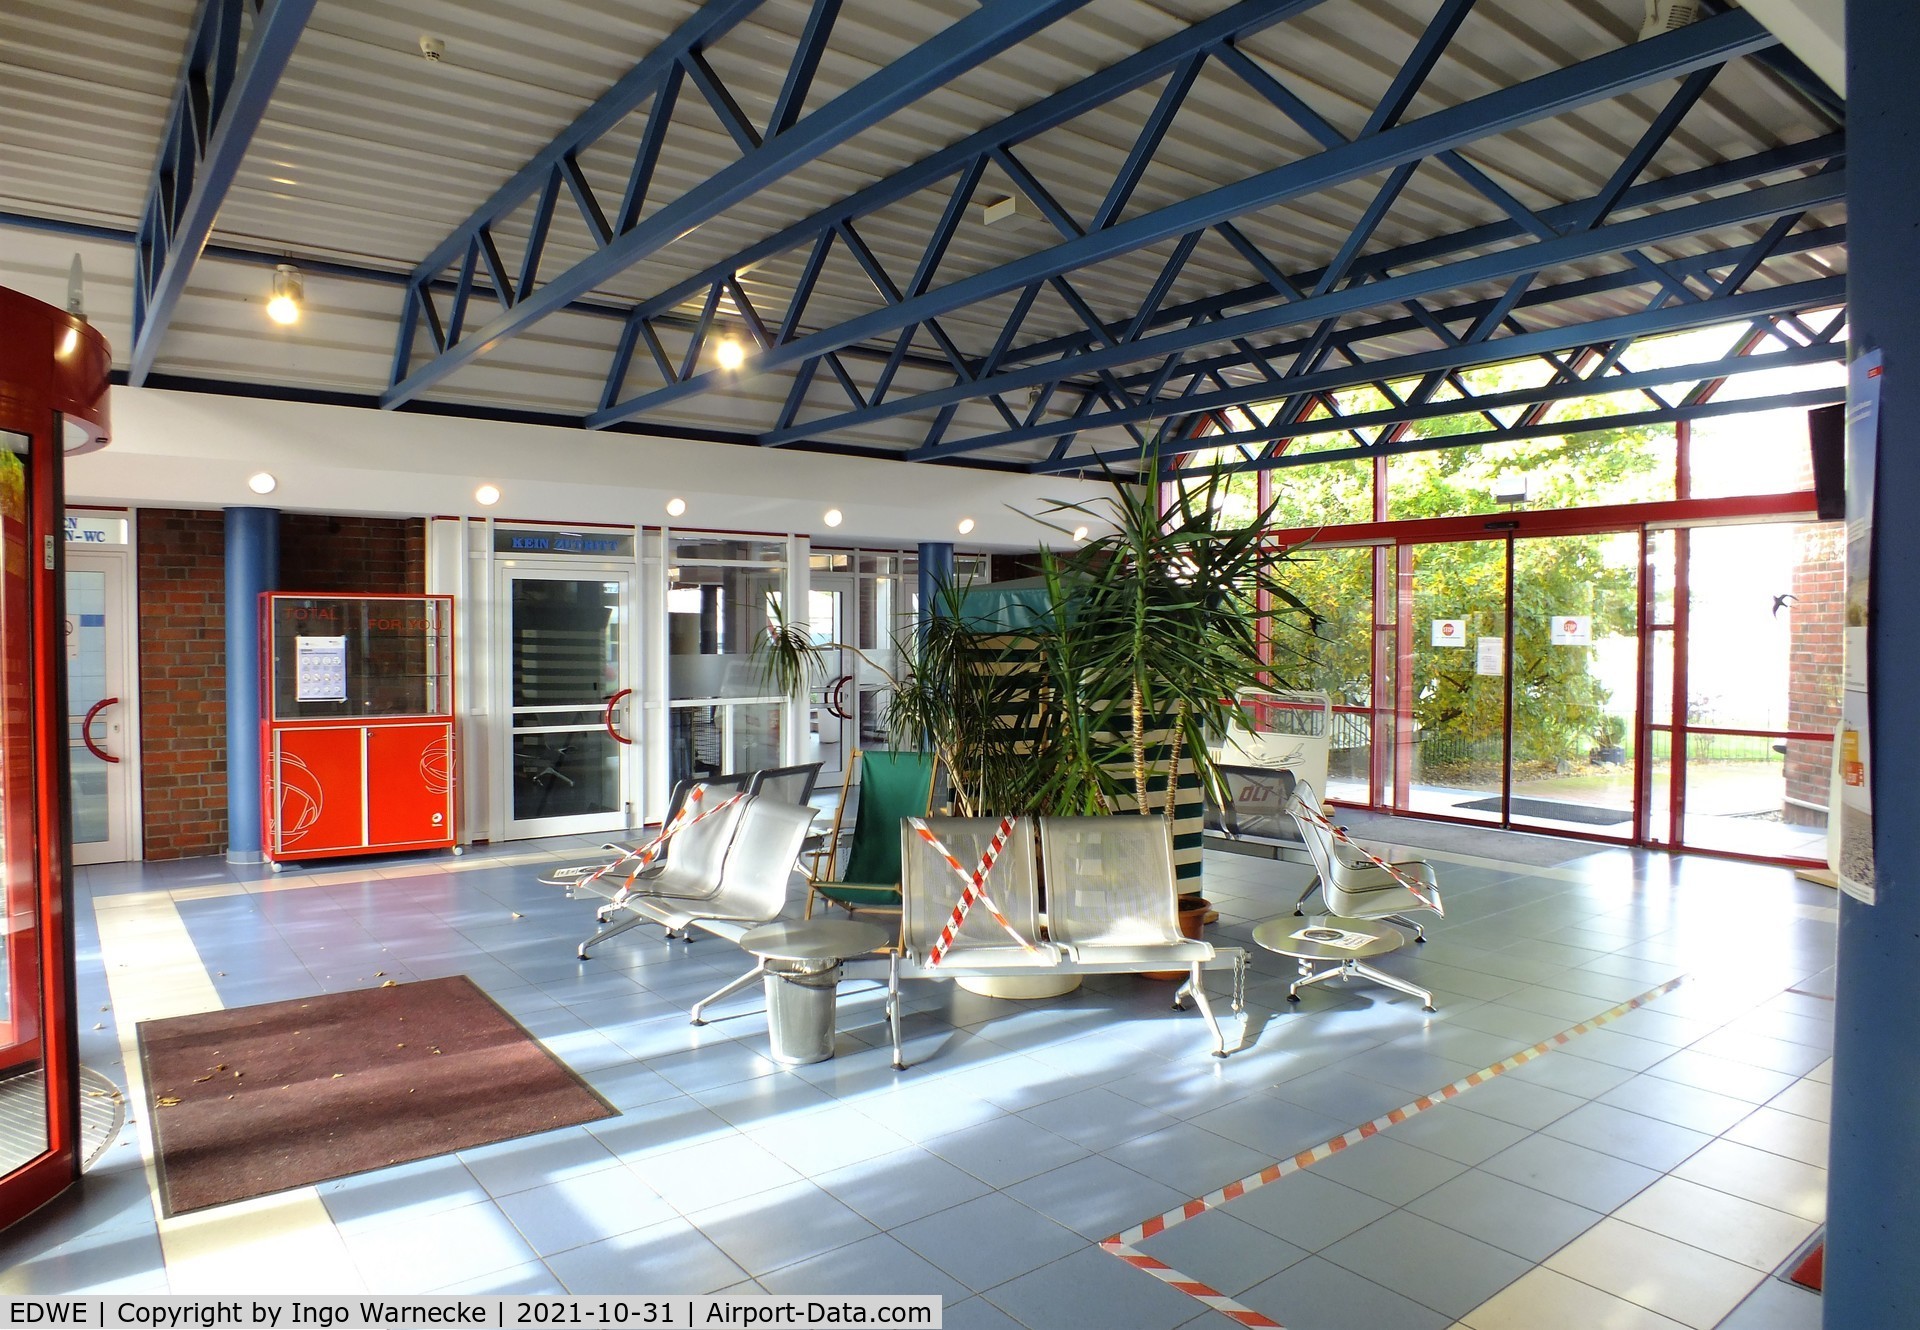 EDWE Airport - inside the terminal at Emden airfield